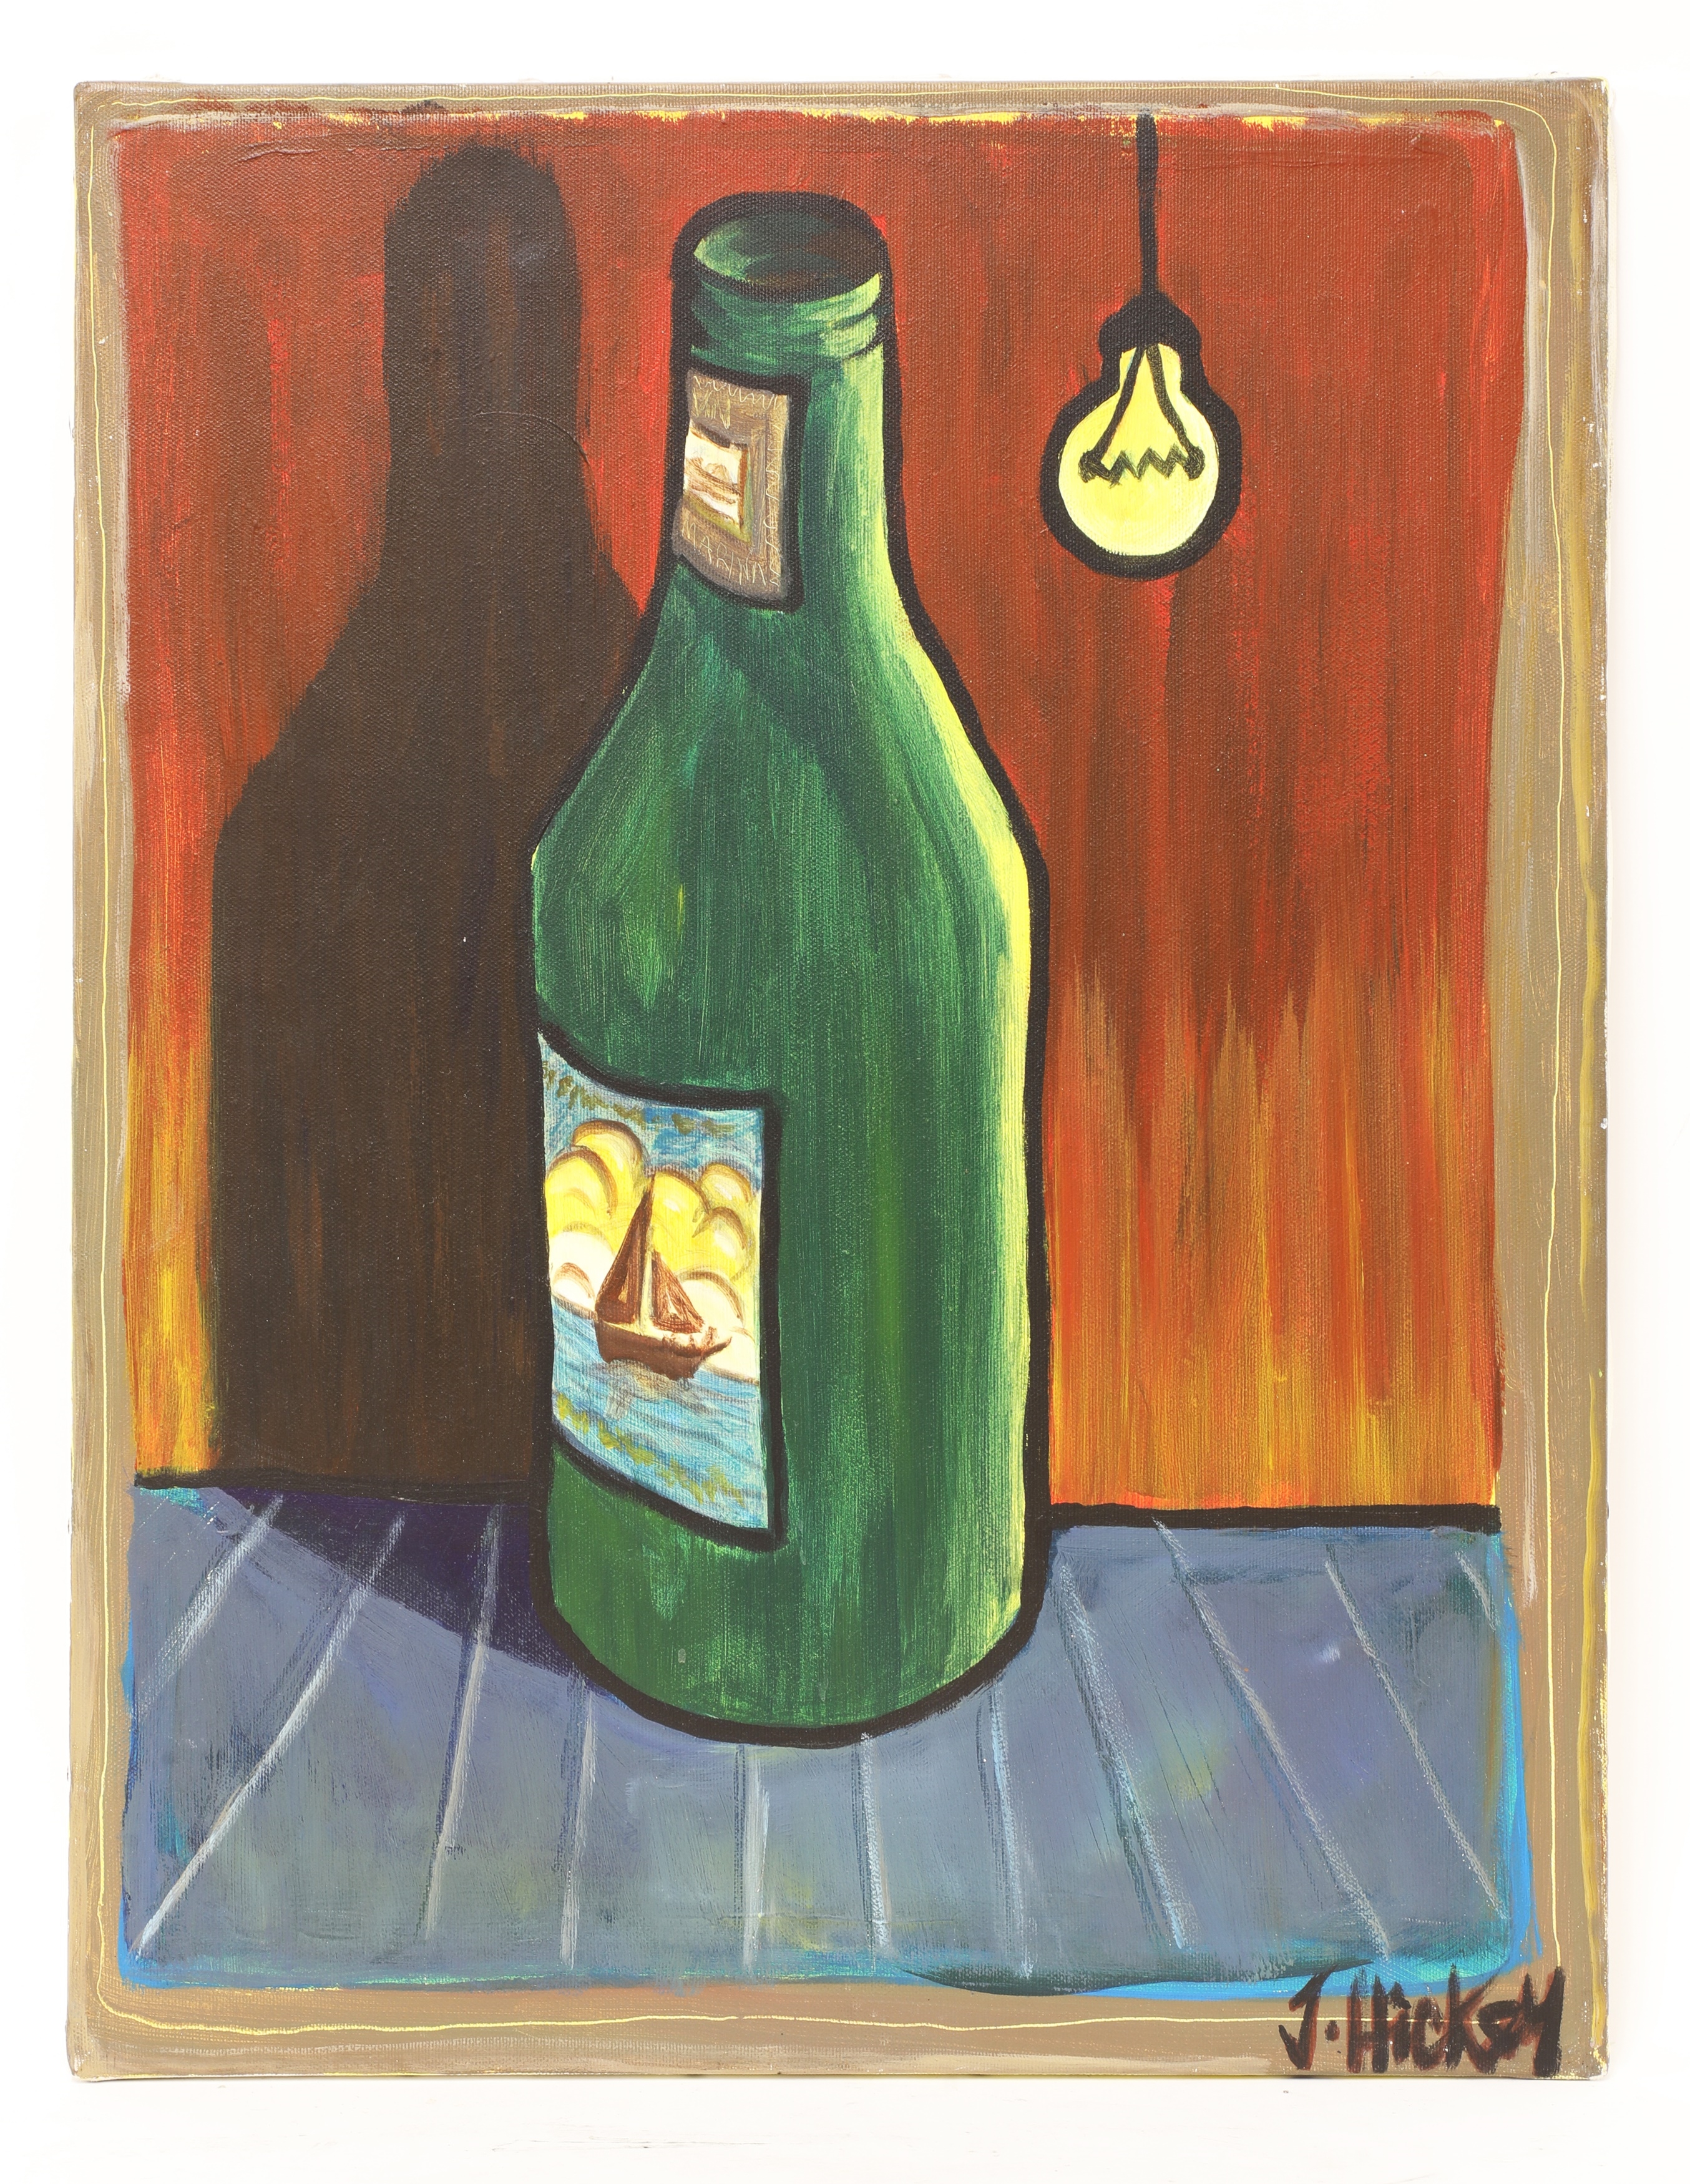 Artwork by Joby Hickey, Bottle, Made of acrylic on canvas